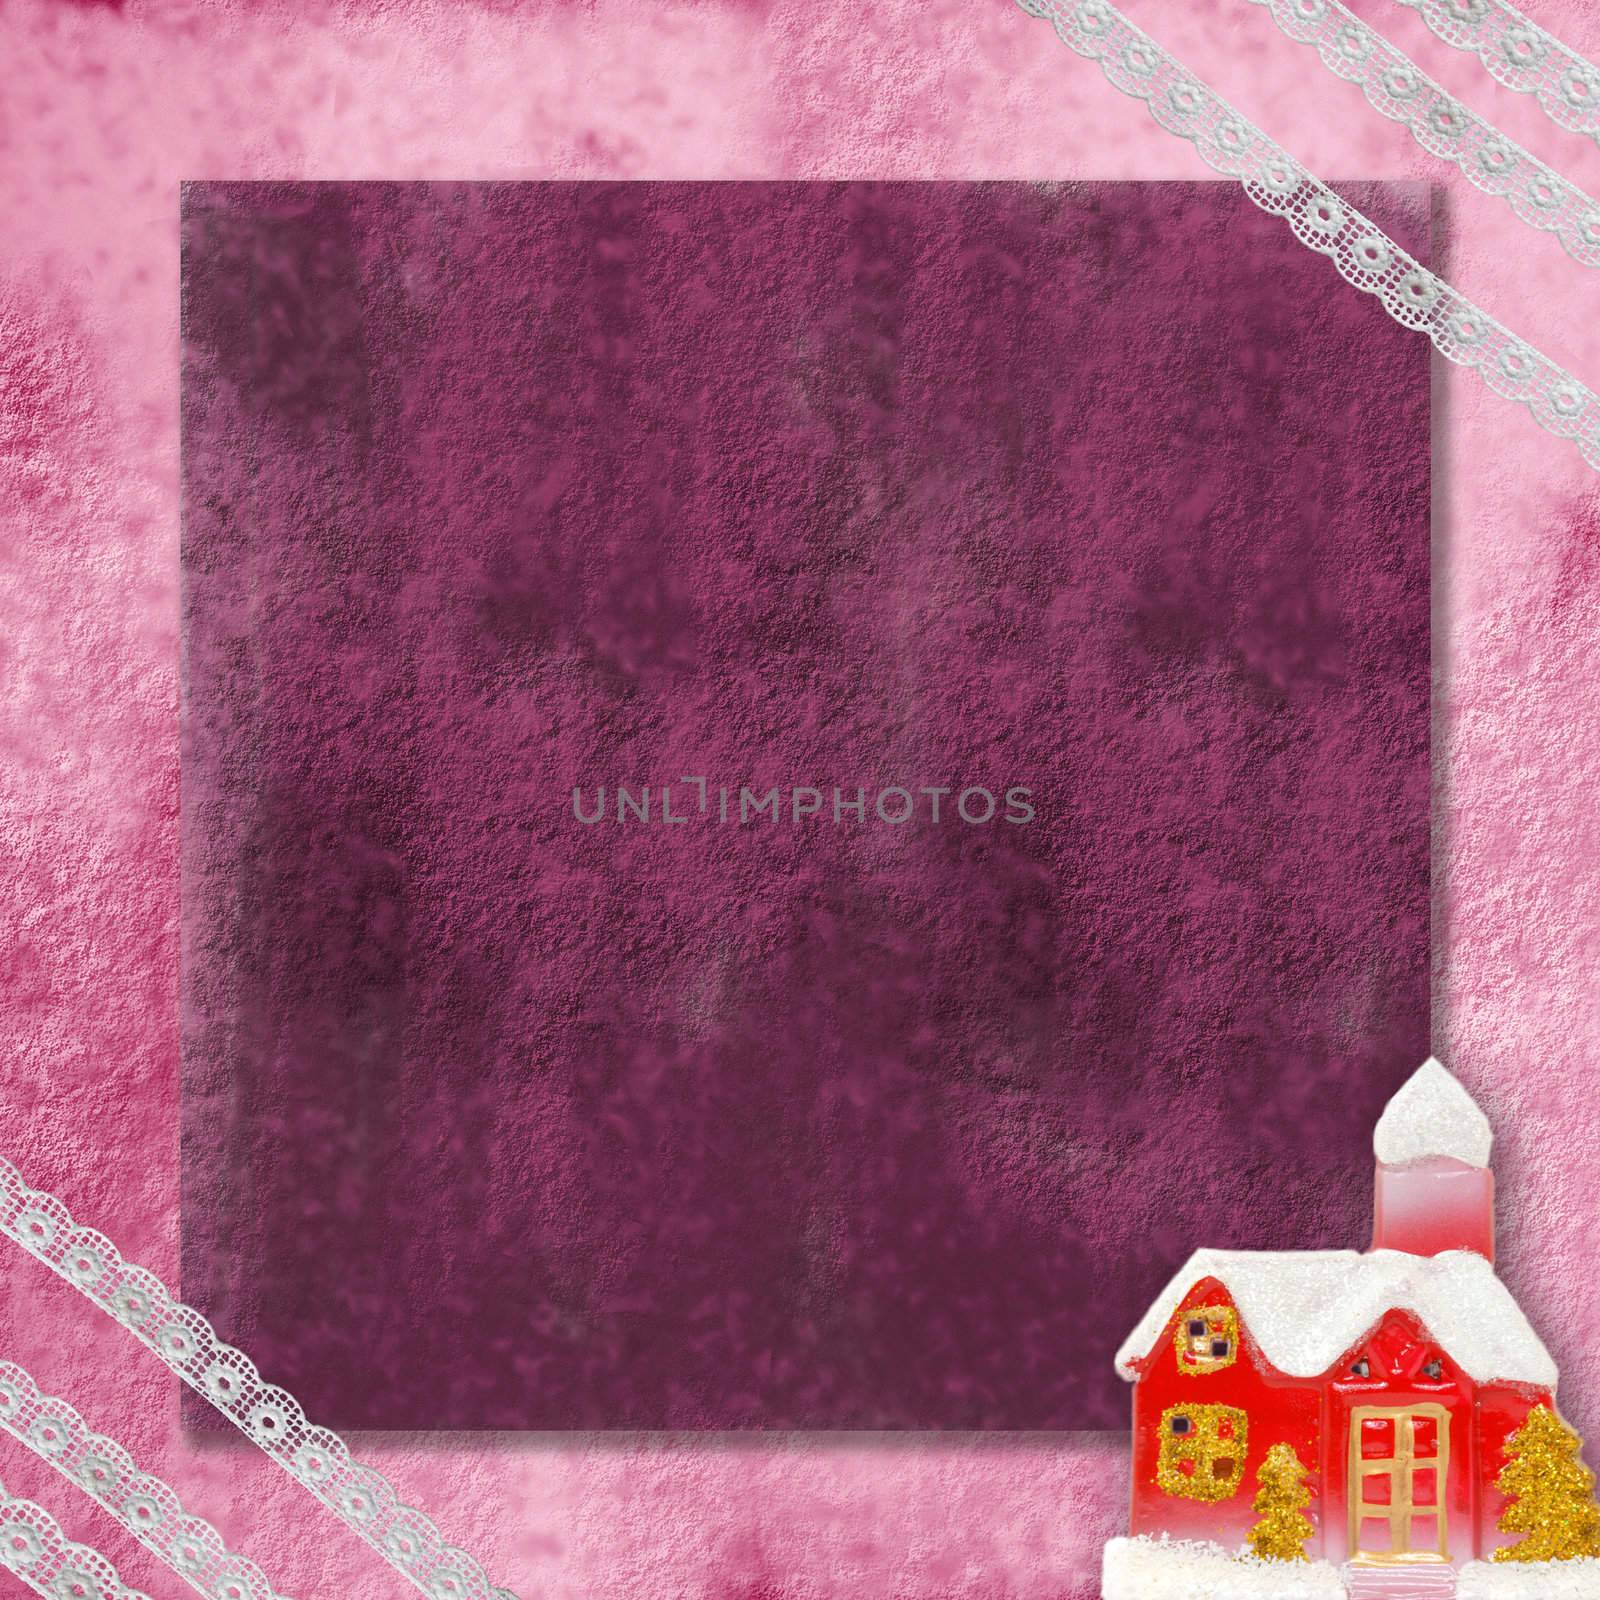 Christmas card with a red house in snow and old lace around the edges.